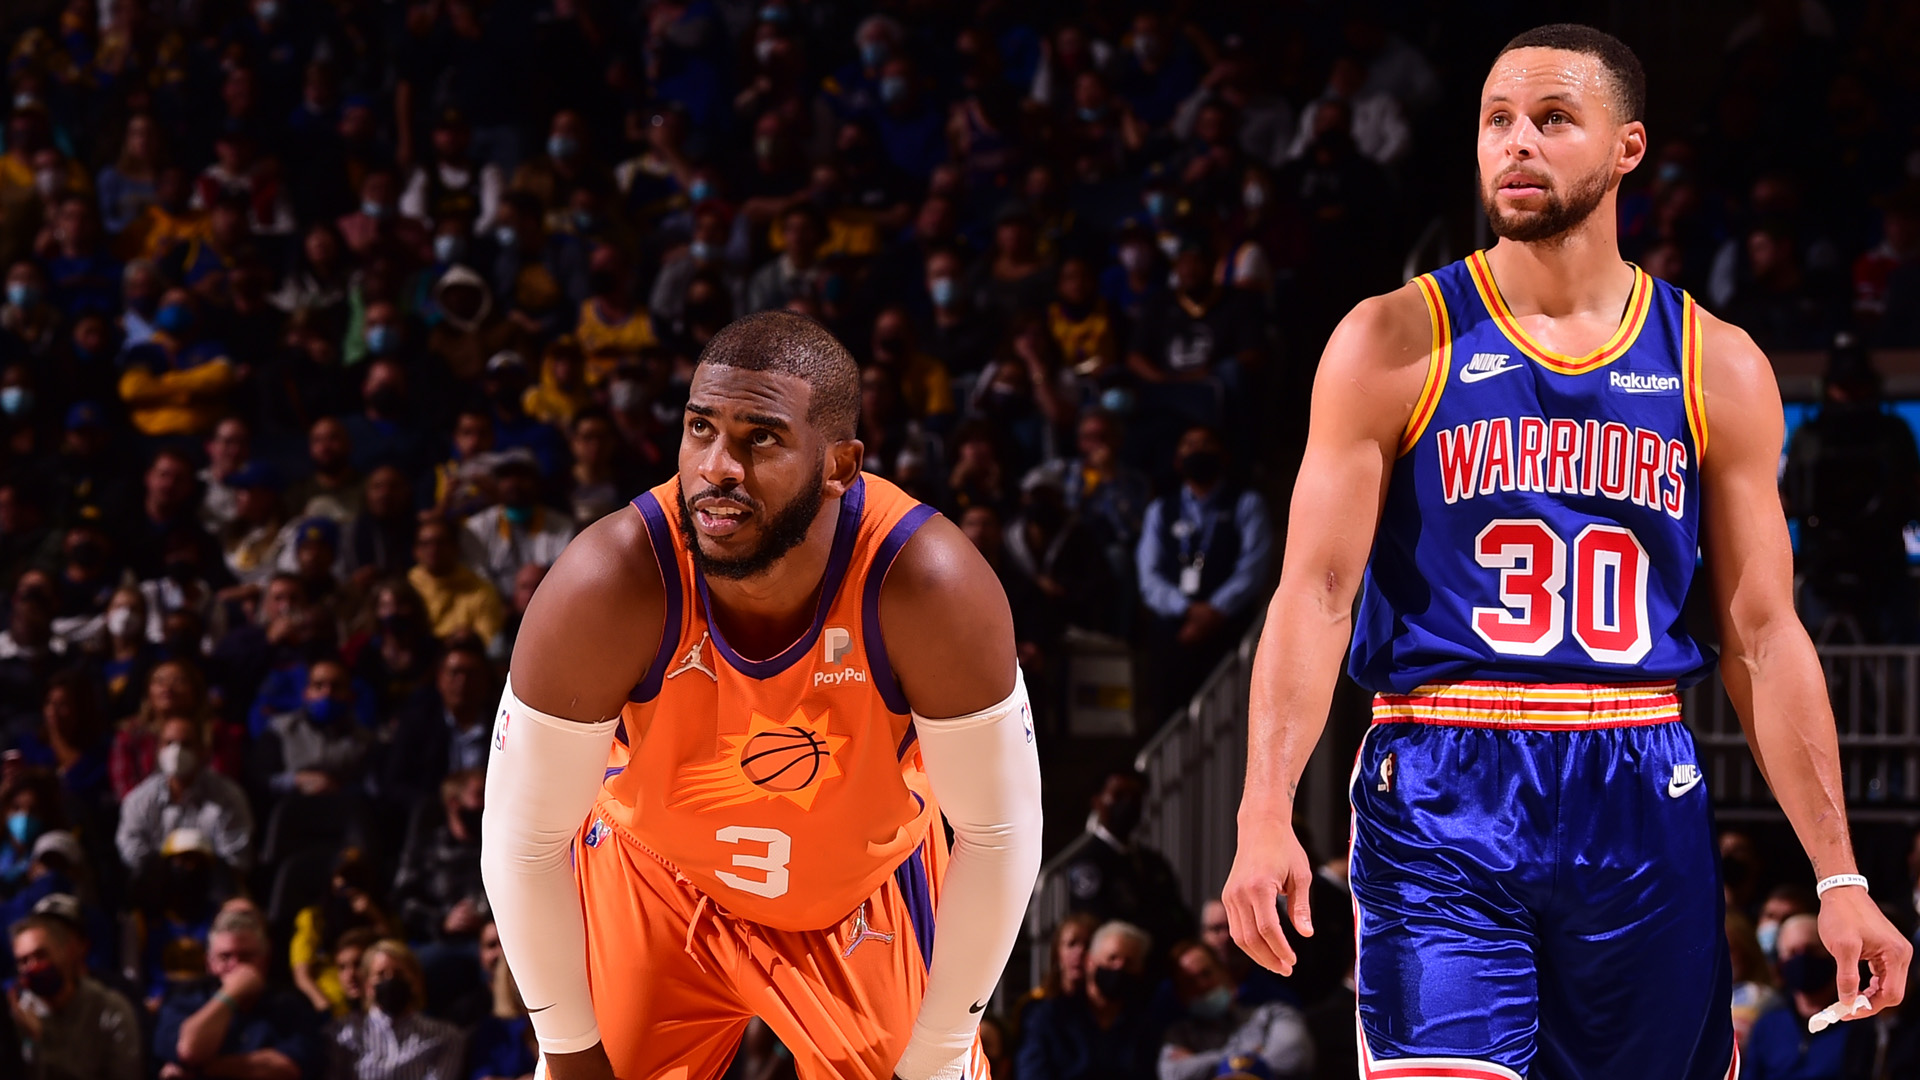 Here’s why Chris Paul would be perfect fit for Warriors next to Stephen Curry